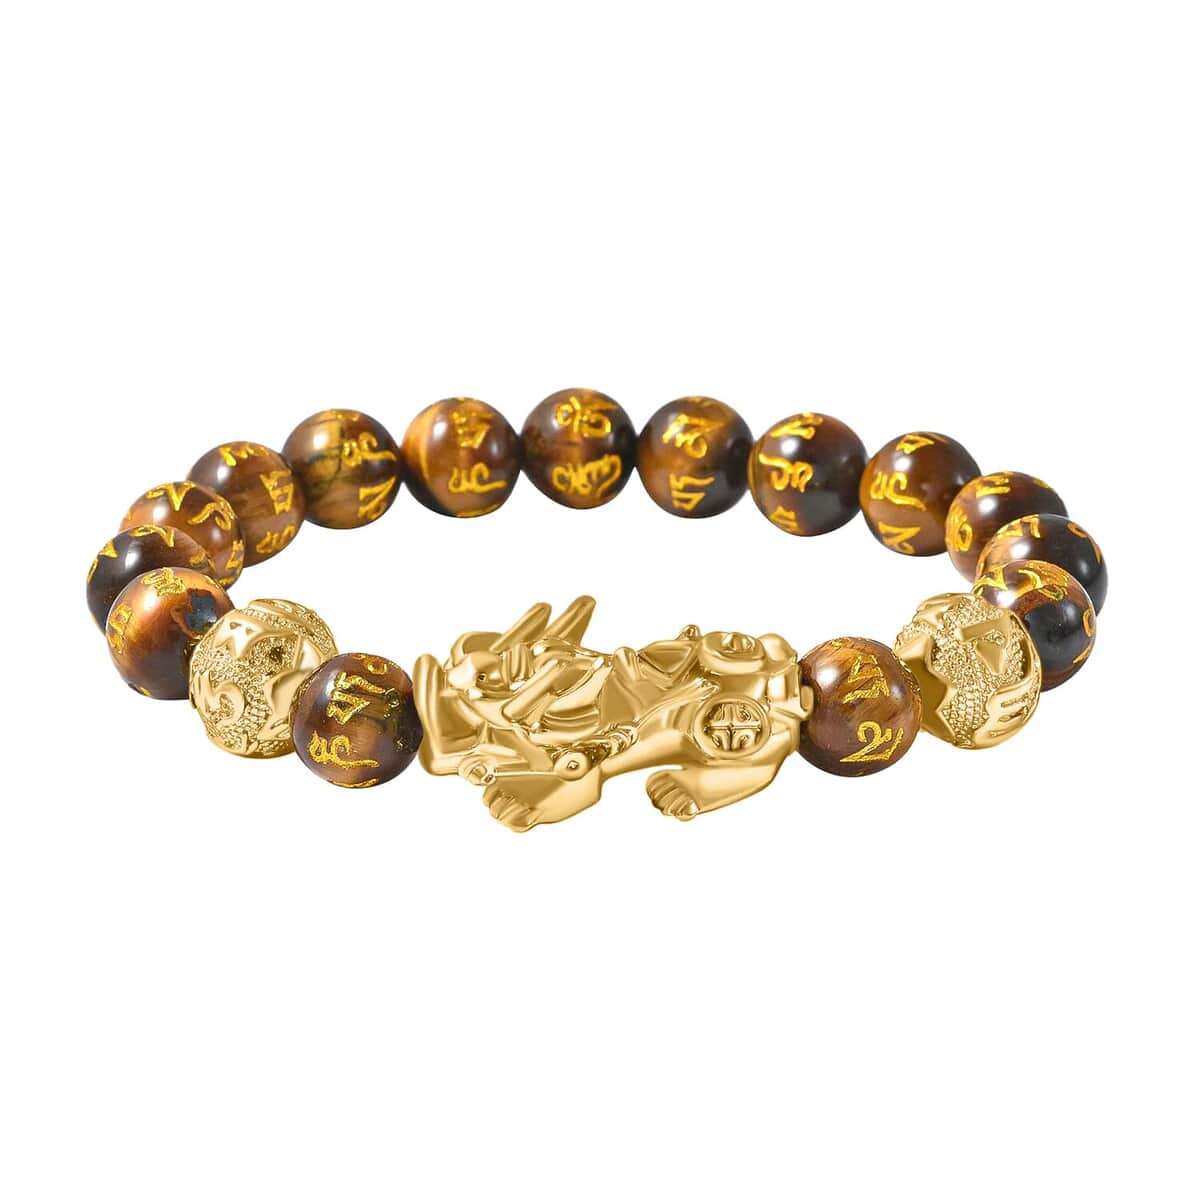 Feng Shui Pixiu Charm Yellow Tiger's Eye Carved Beads Stretch Bracelet in Goldtone, Stretchable Bracelet, Good Luck Birthday Gift 112.50 ctw image number 0